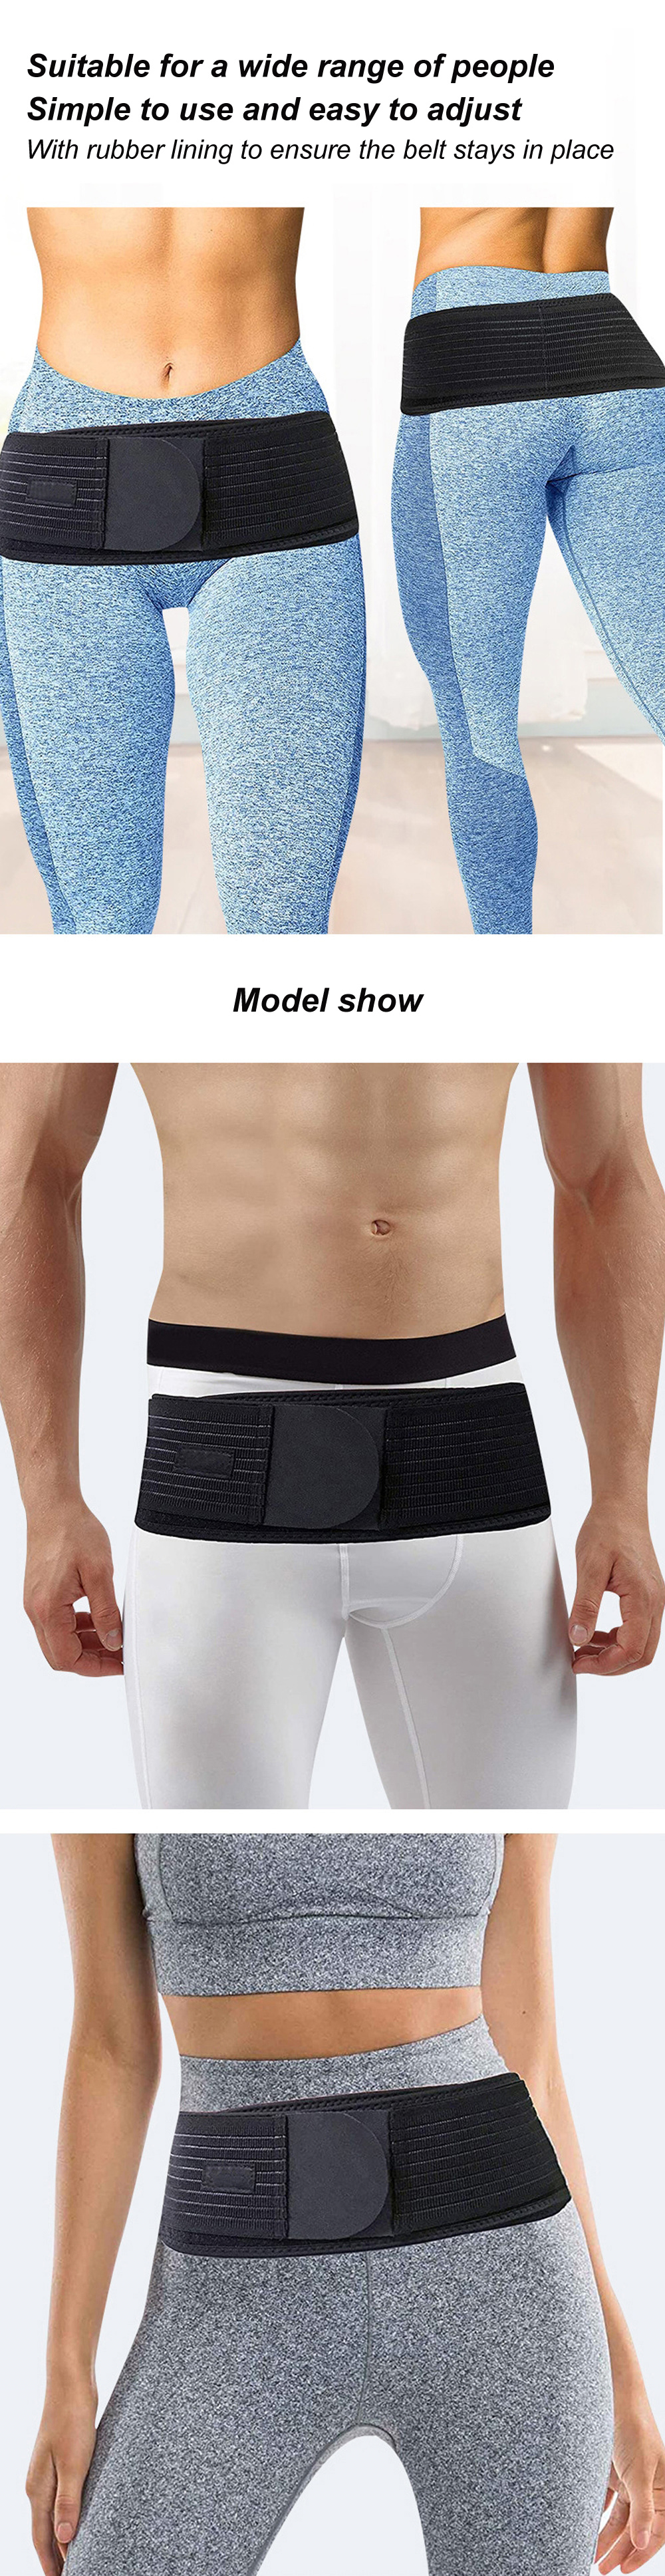 Sacroiliac-SI-Joint-Support-Waist-Belt-Reduce-Sciatic-Pelvic-Lower-Back-and-Leg-Pain-Stabilize-SI-Jo-1918488-2